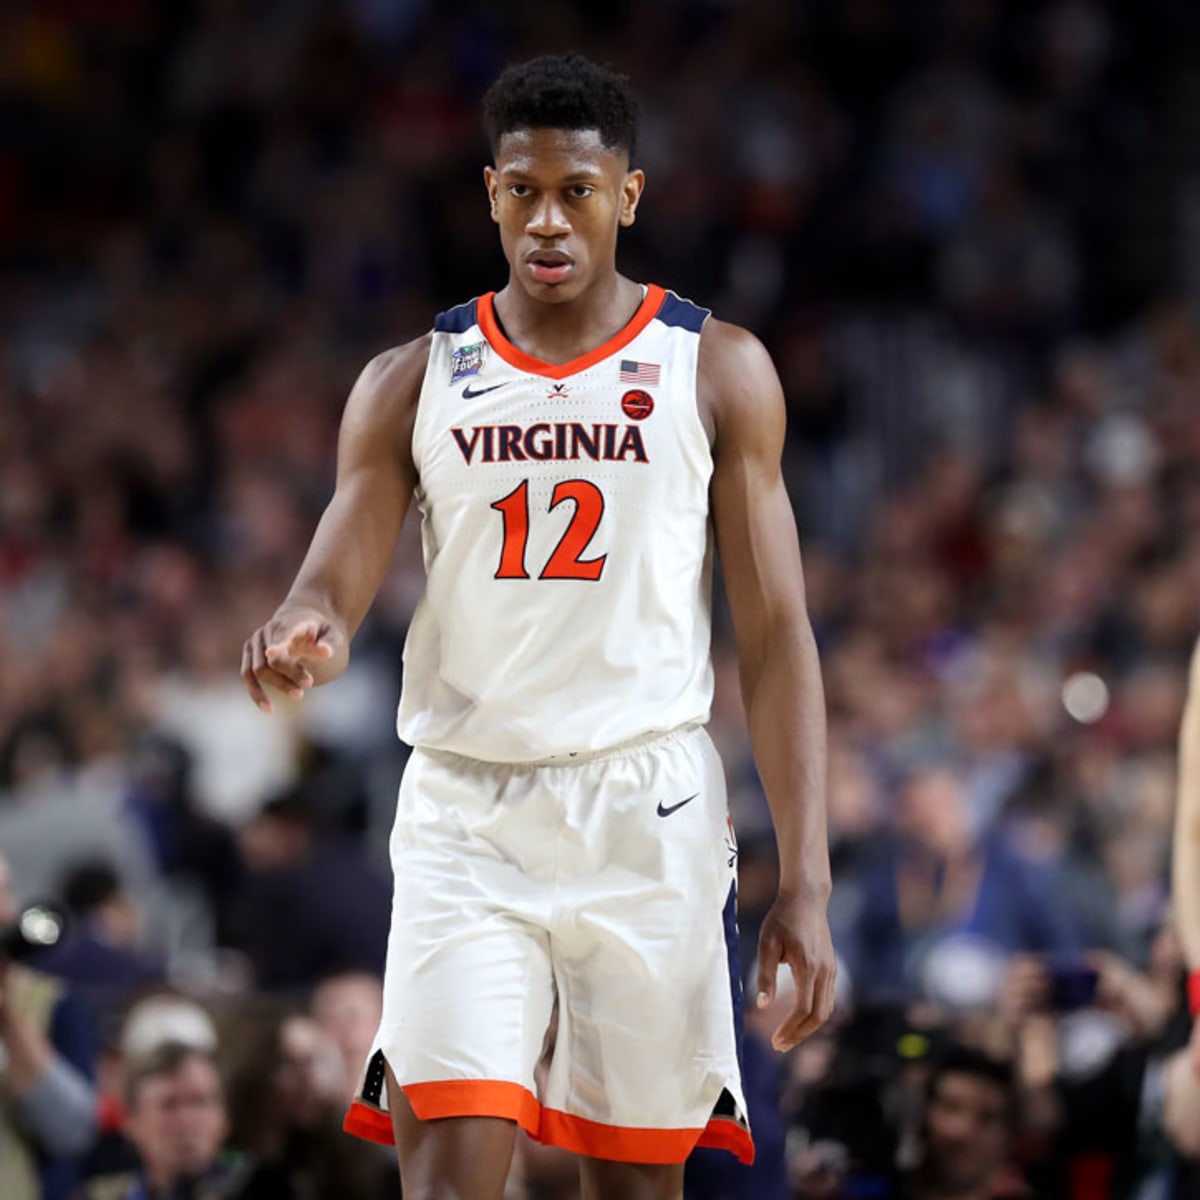 2019 NBA Draft Profile: De'Andre Hunter ready for the next step